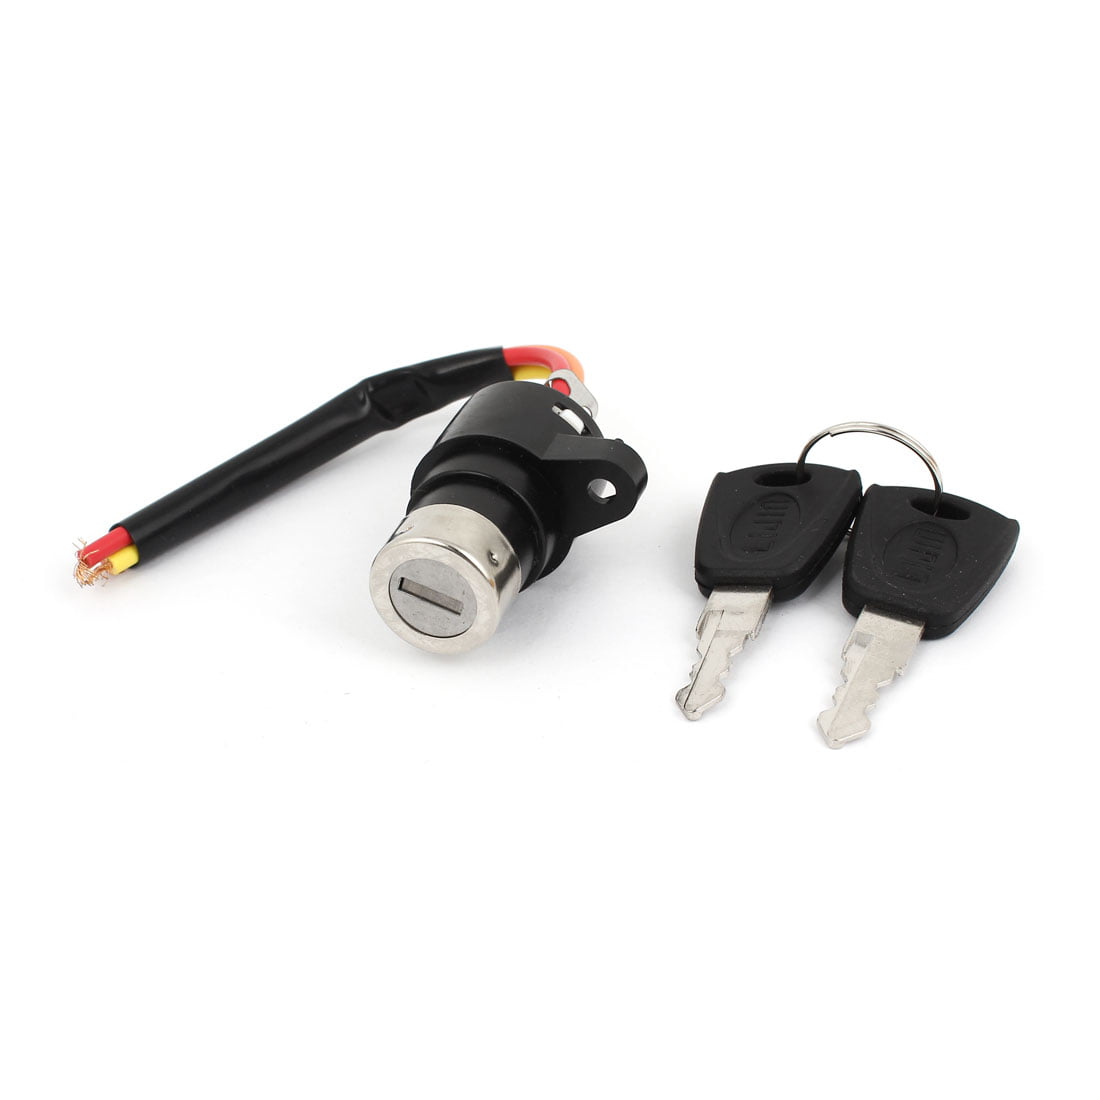 Electric Bicycle Ignition Switch Key Power Lock for Electric Scooter Bike